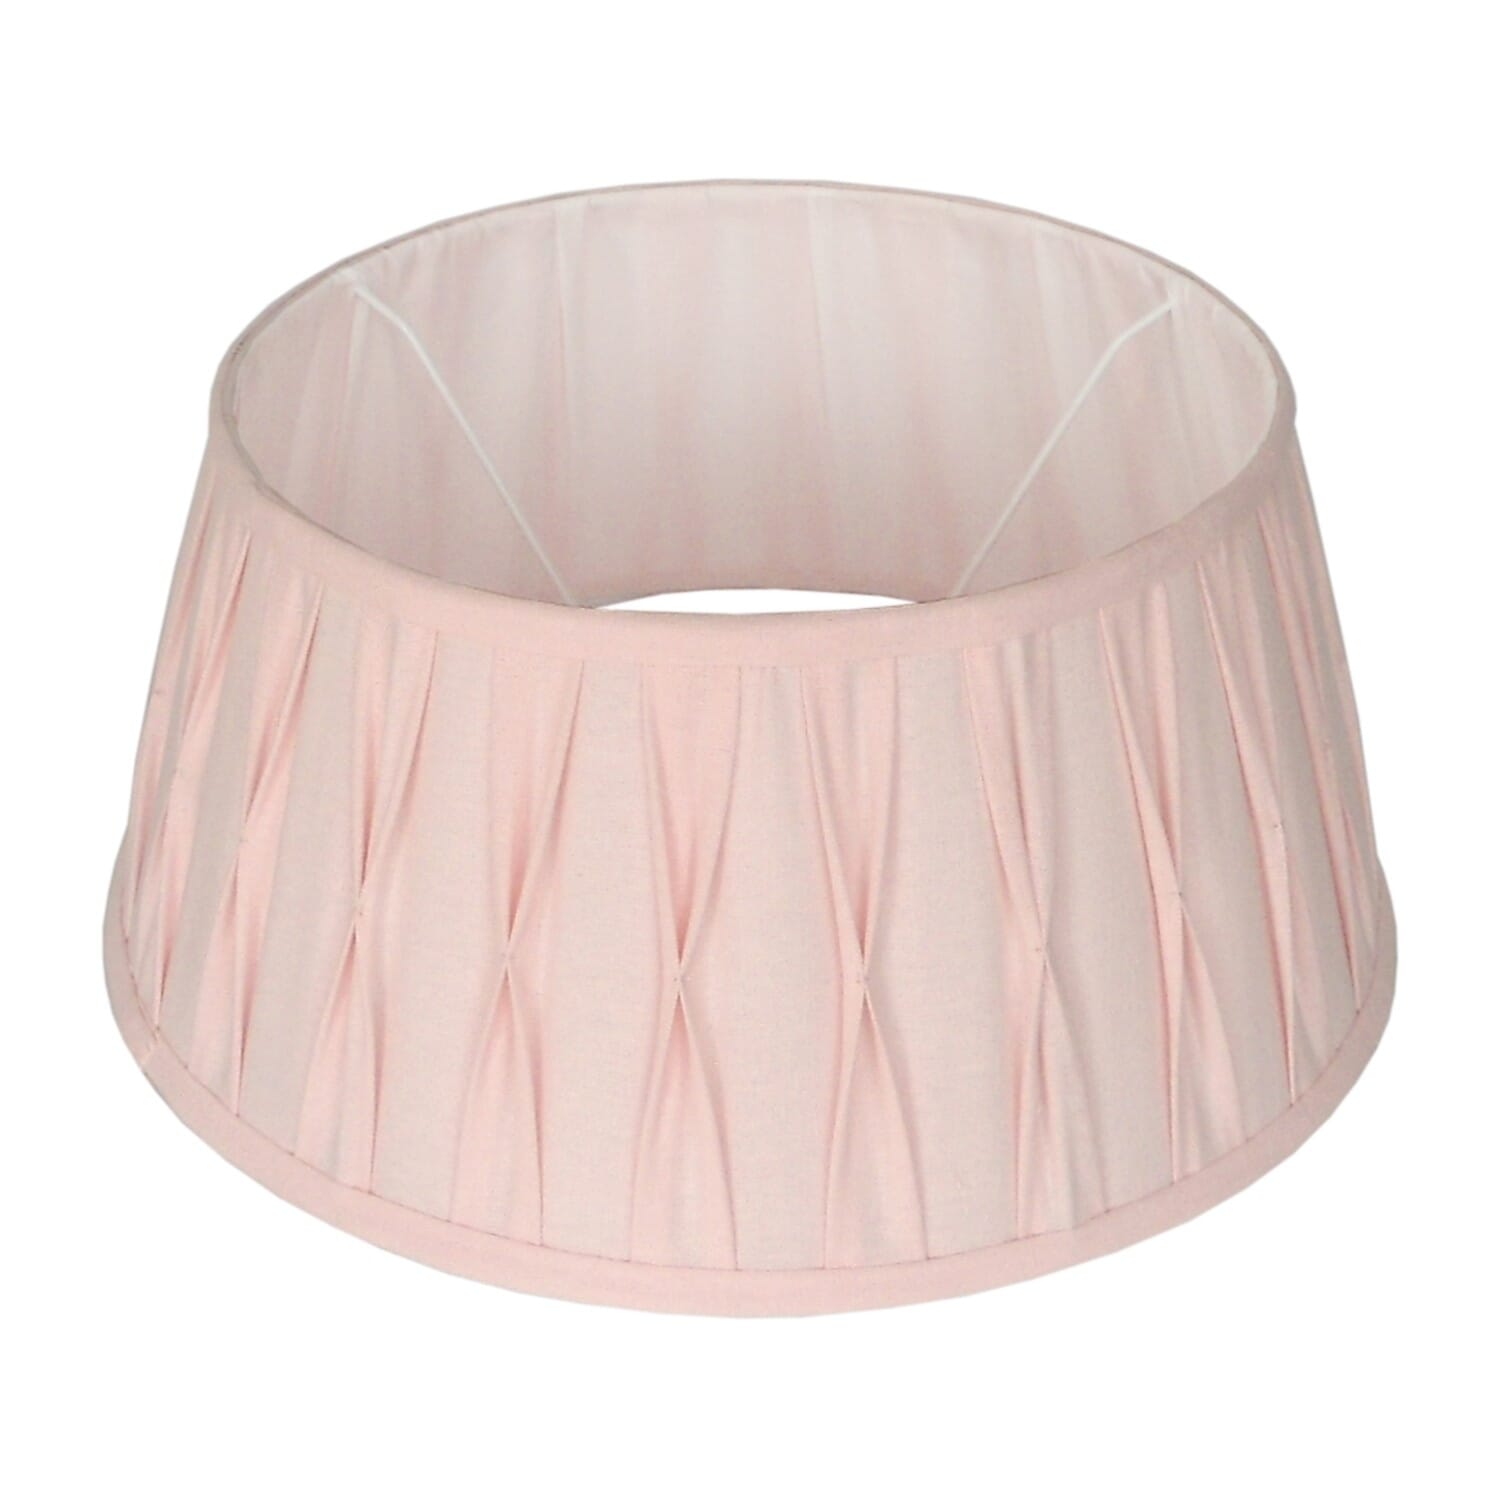 Standing lampshade pleated Riva drum 60 cm pink